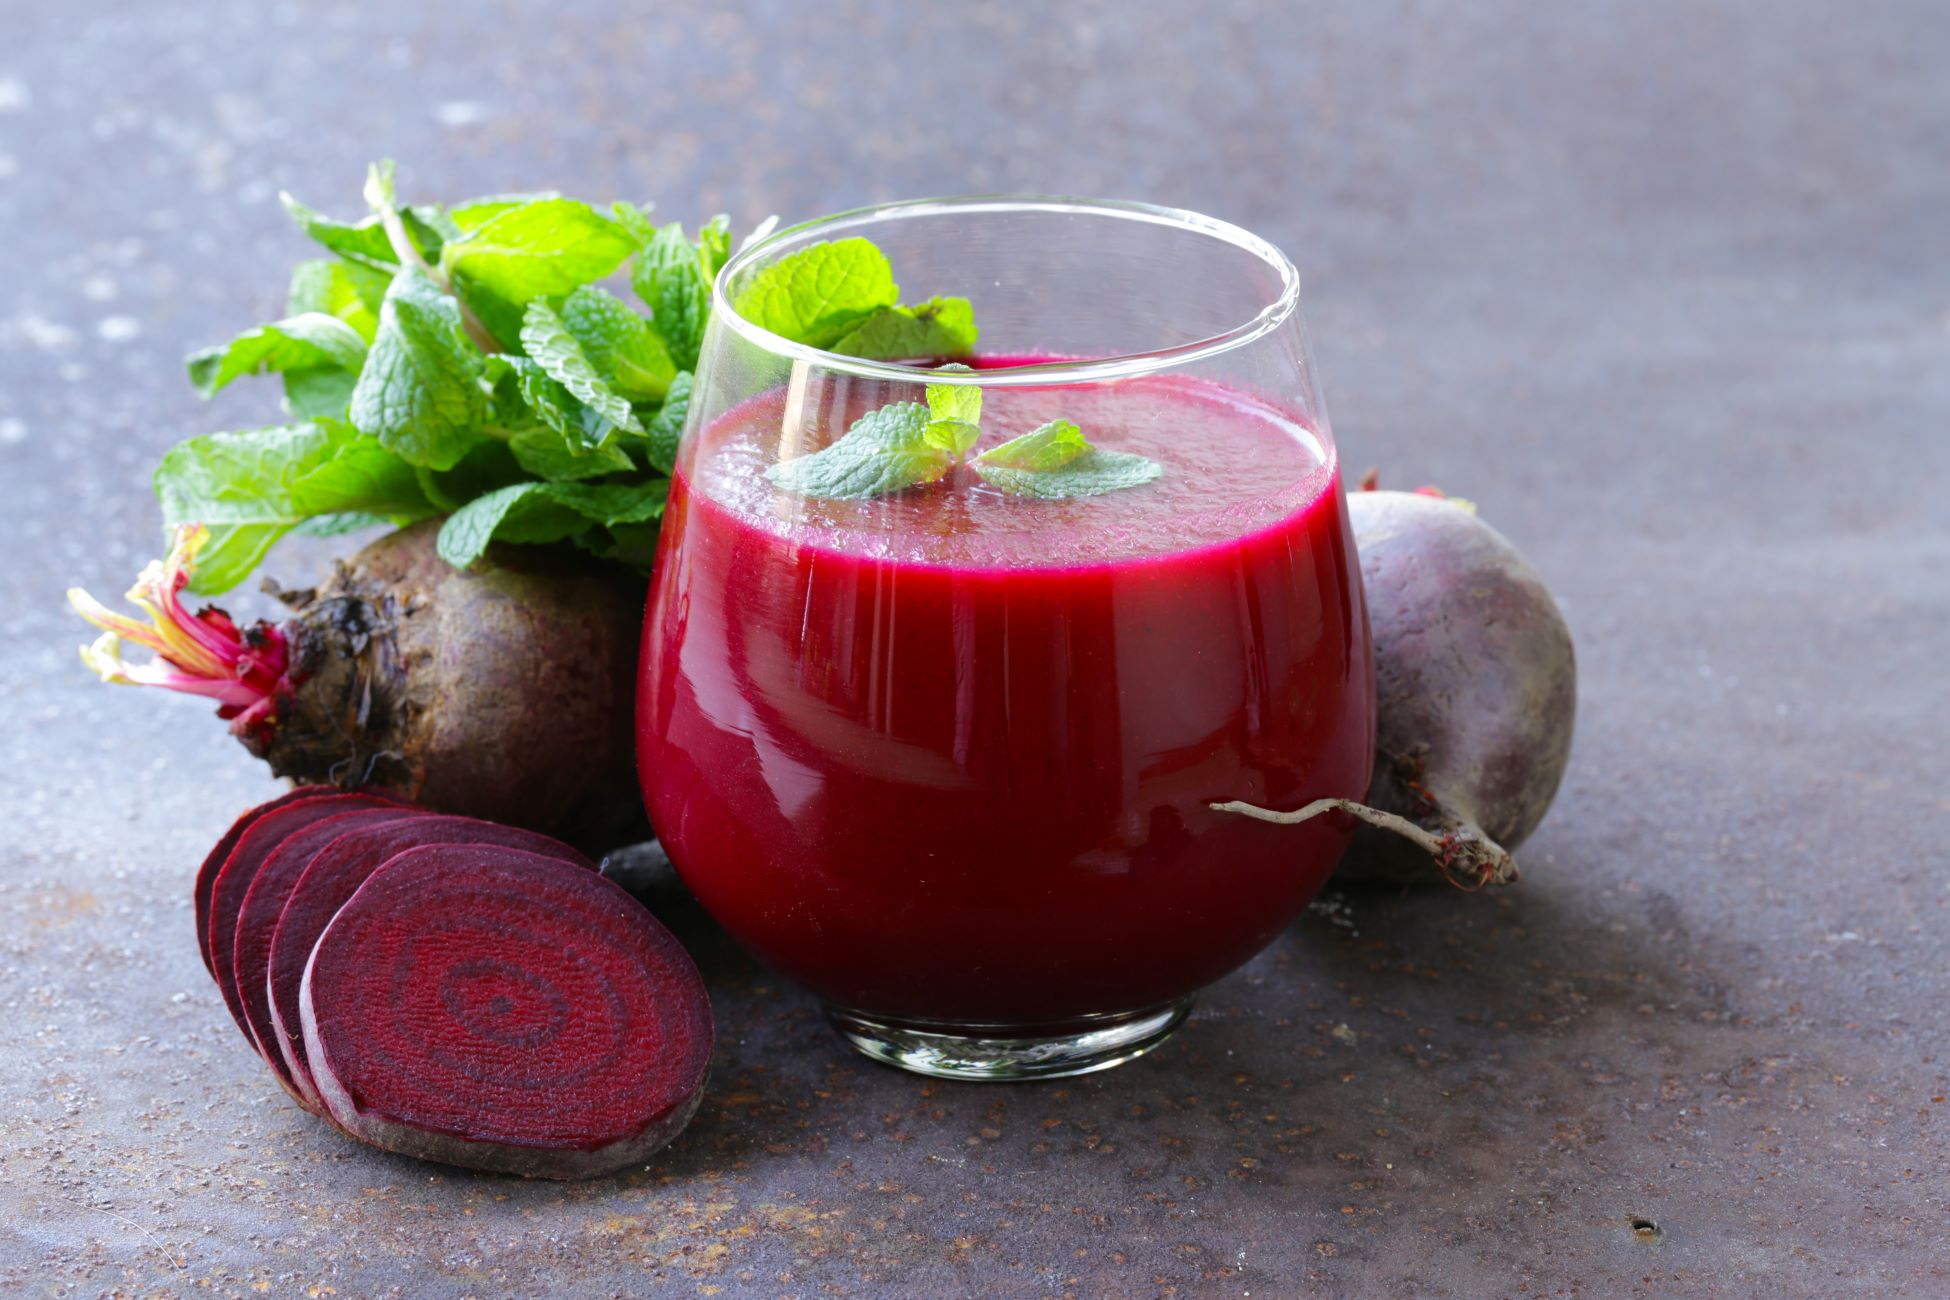 How Long Does It Take For A Glass Of Beet Juice To Lower Blood Pressure